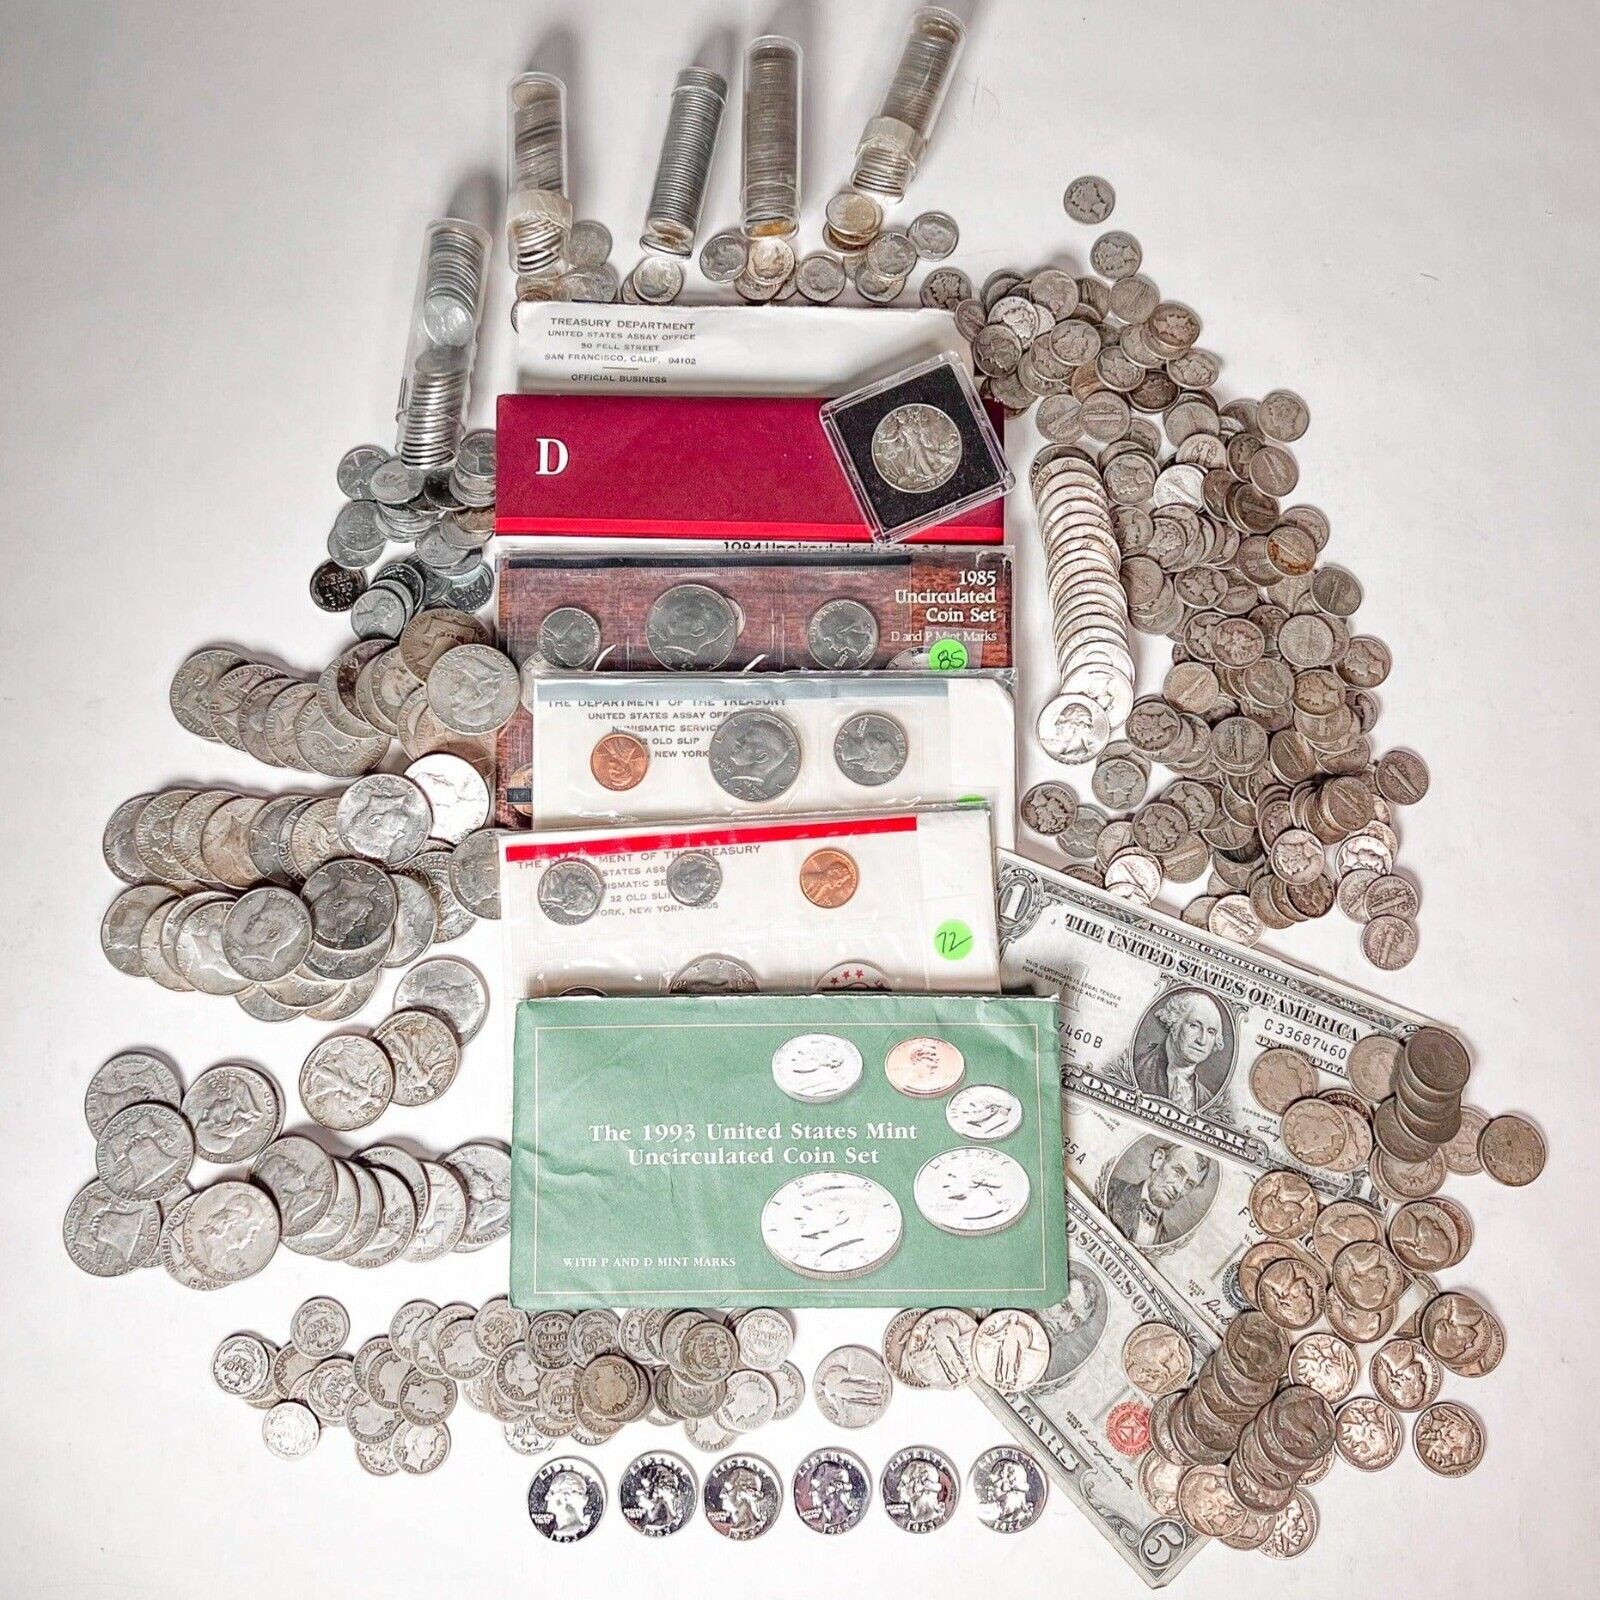 Mint Set U.S COIN MIXED LOT | Vintage Coin ESTATE SALE LIQUIDATION | Silver Coin